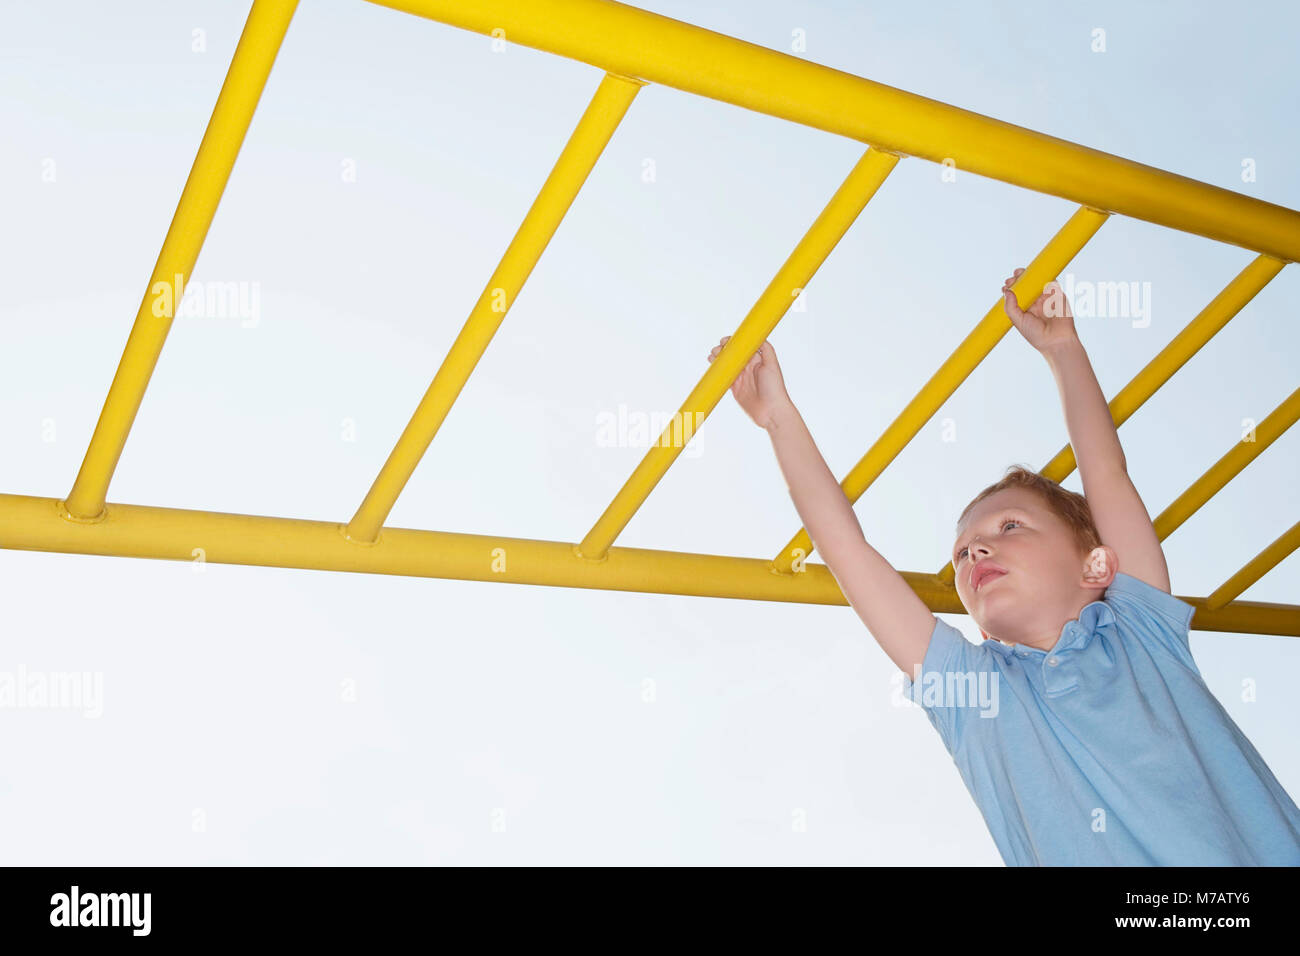 Low angle view of a boy hanging on monkey bars Stock Photo